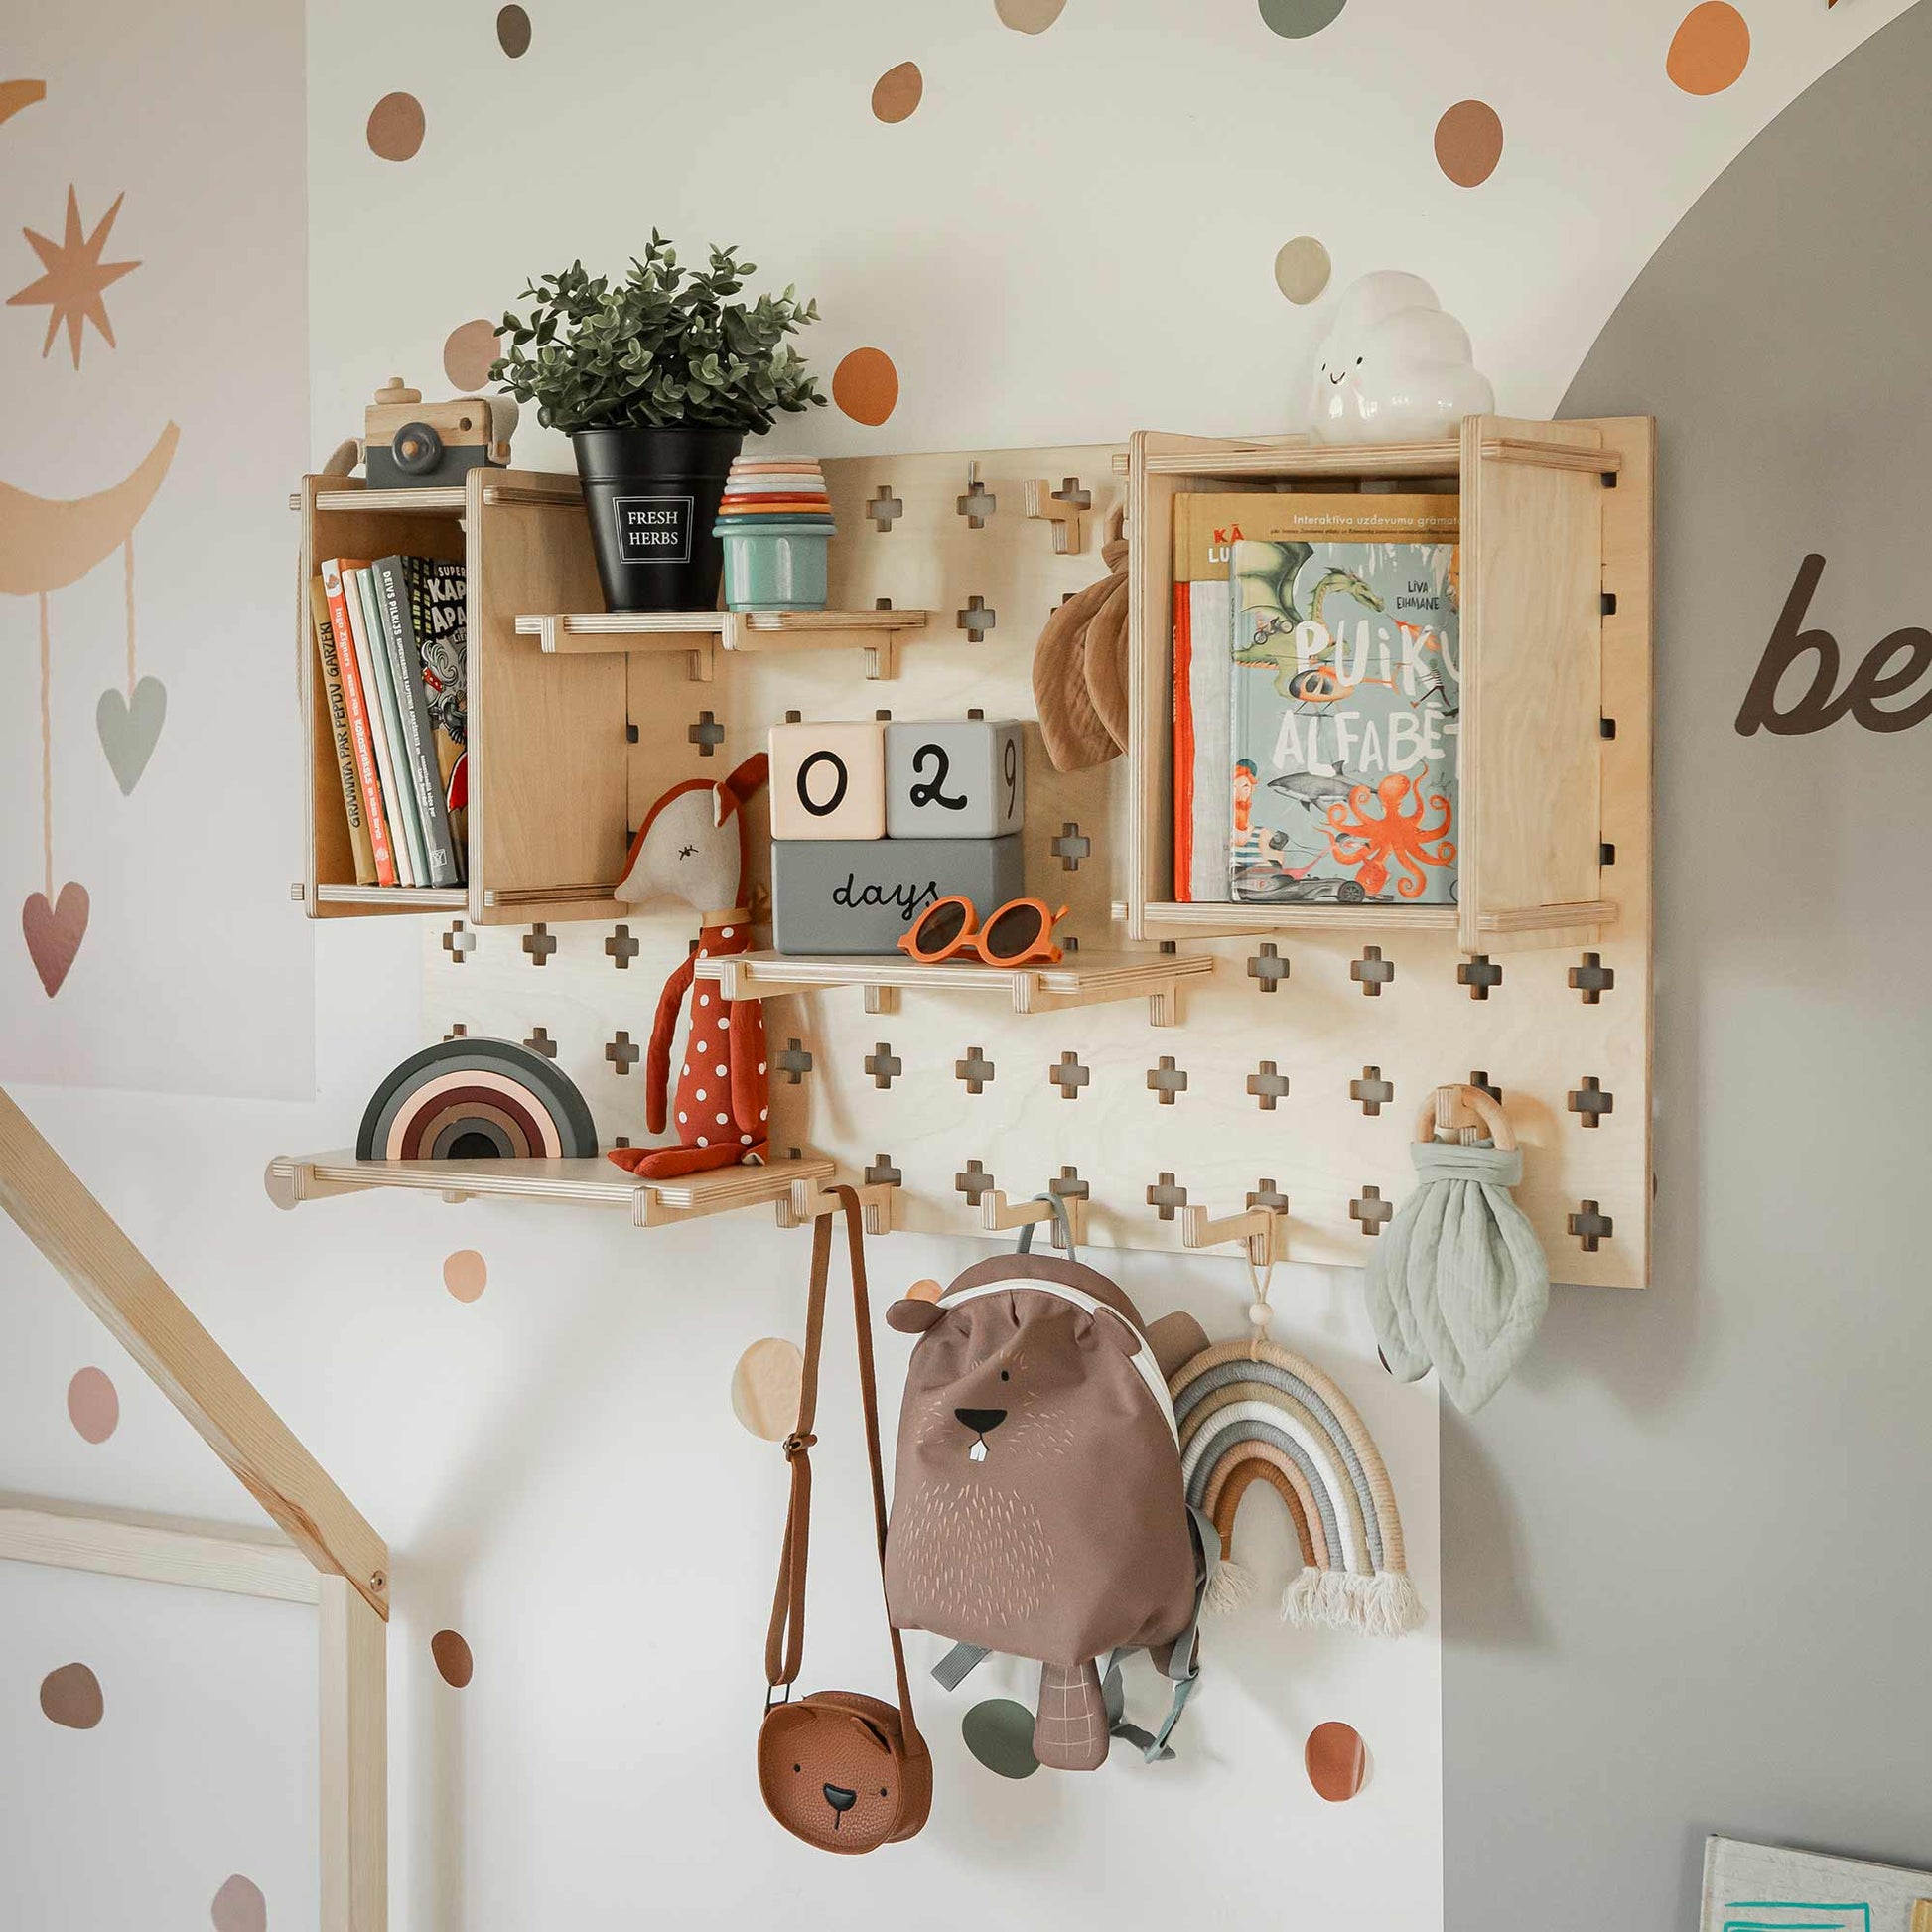 A Pegboard Wall Shelf with books, a plant, a calendar displaying '02 days,' a pair of glasses, small containers, a stuffed mushroom, a bear-themed backpack, and rainbow decorations offers versatile storage solutions.